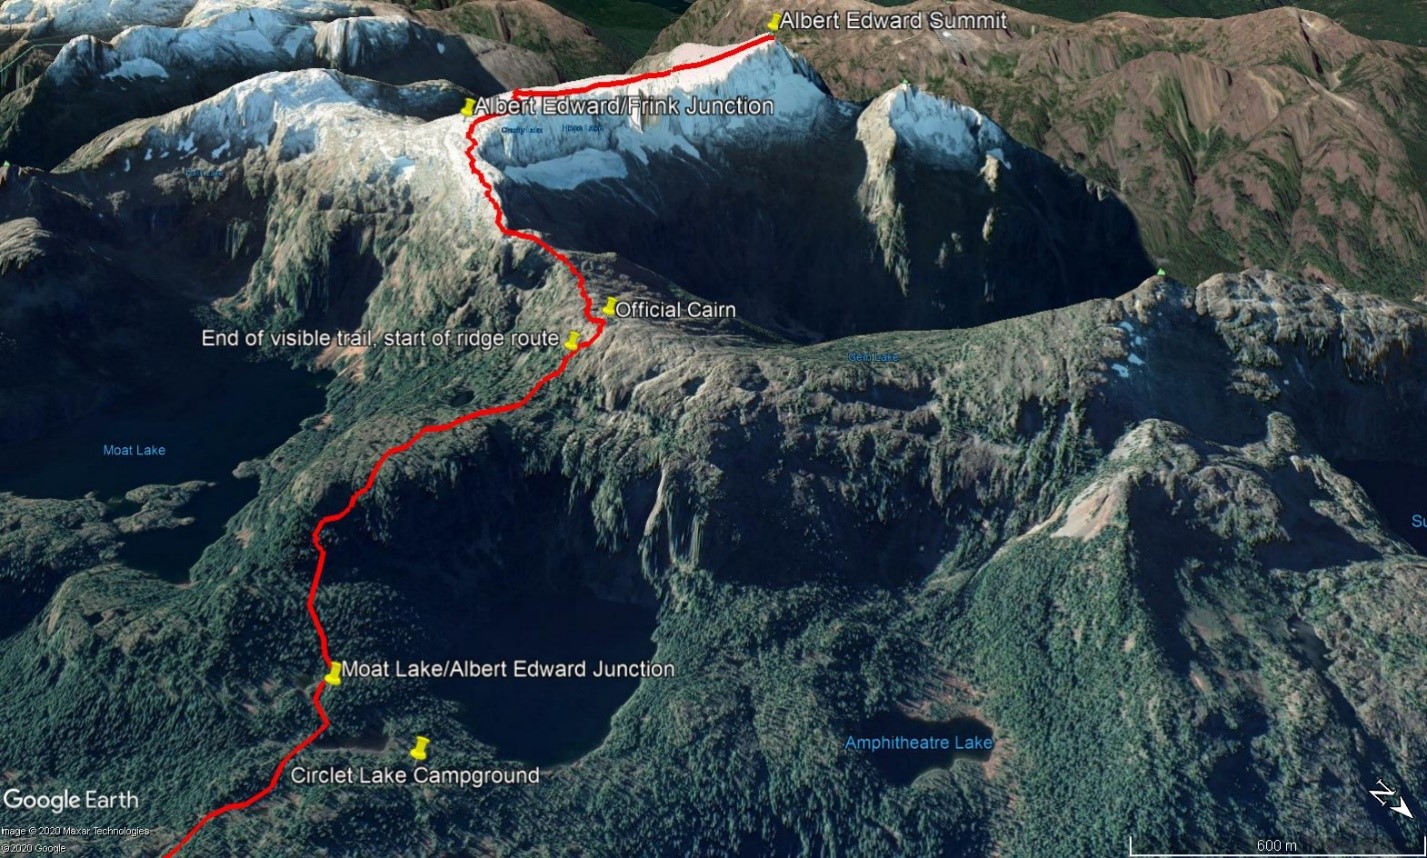 route map showing important location from circlet lake to the albert edward summit